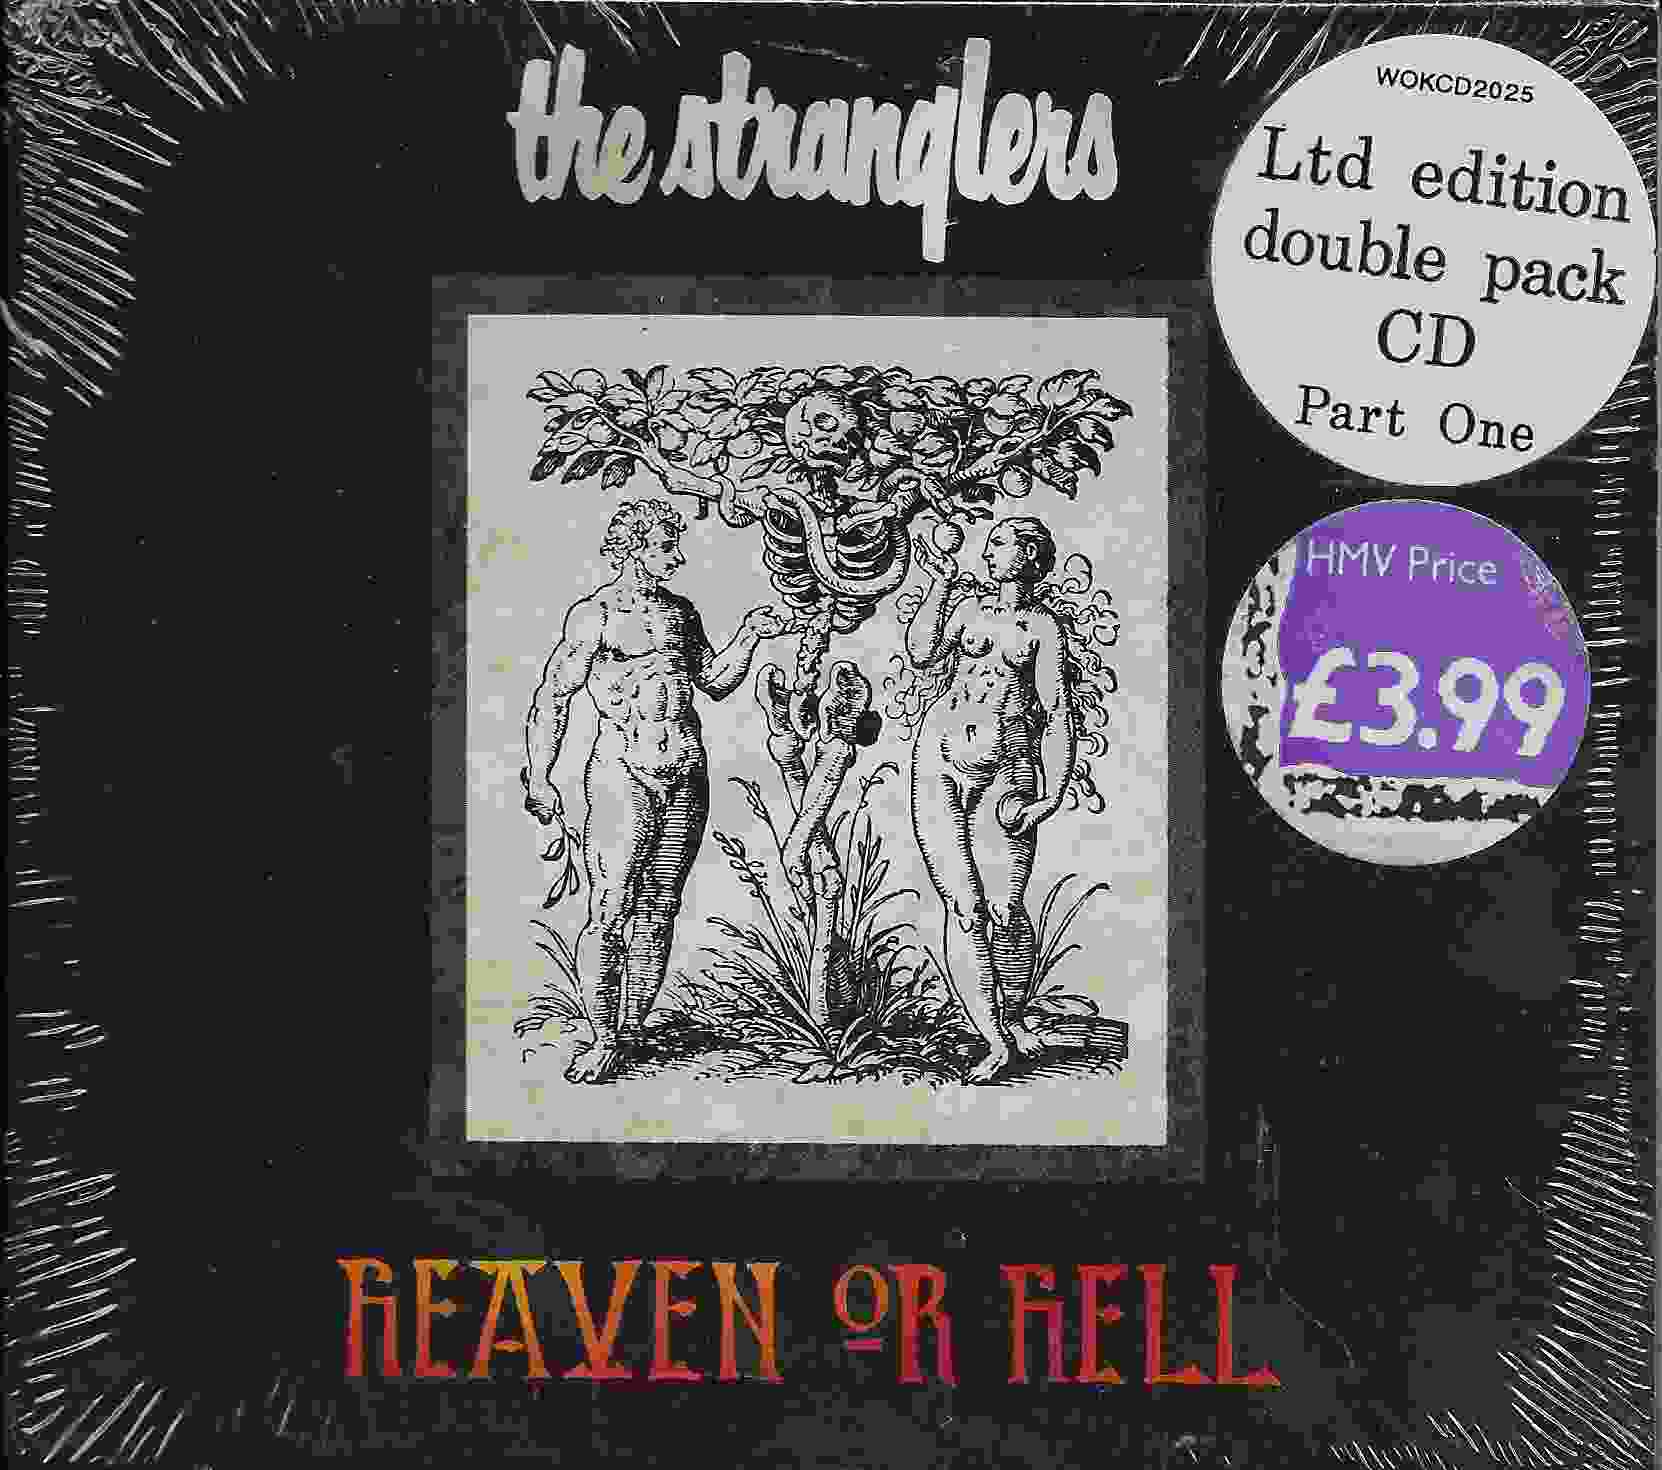 Picture of WOKCD 2025 Heaven or Hell by artist The Stranglers